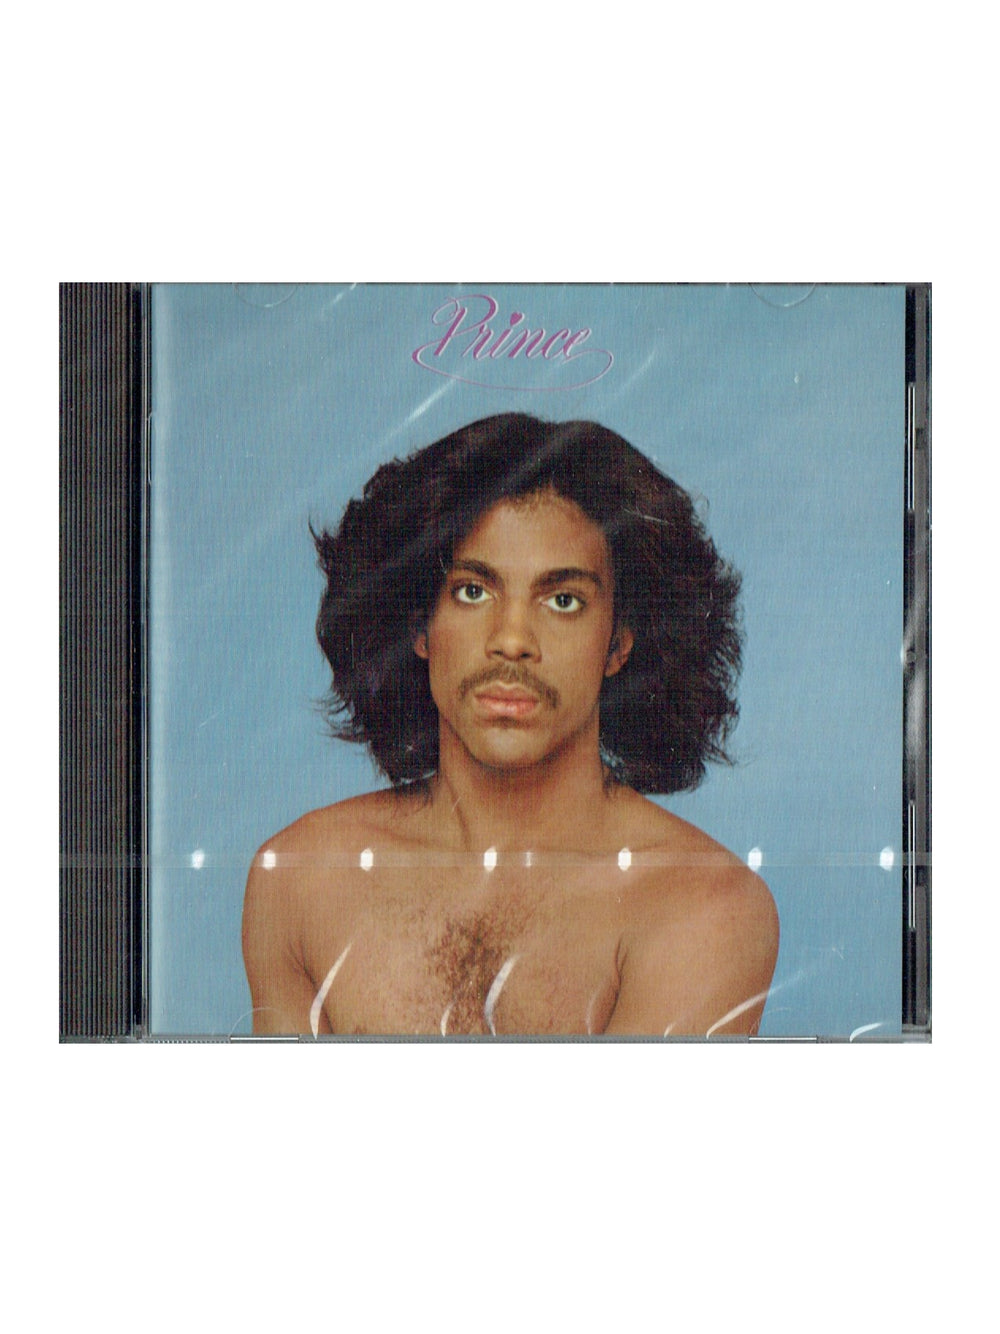 Prince – Prince  Self Titled CD Album 1 Reissue NEW 2020